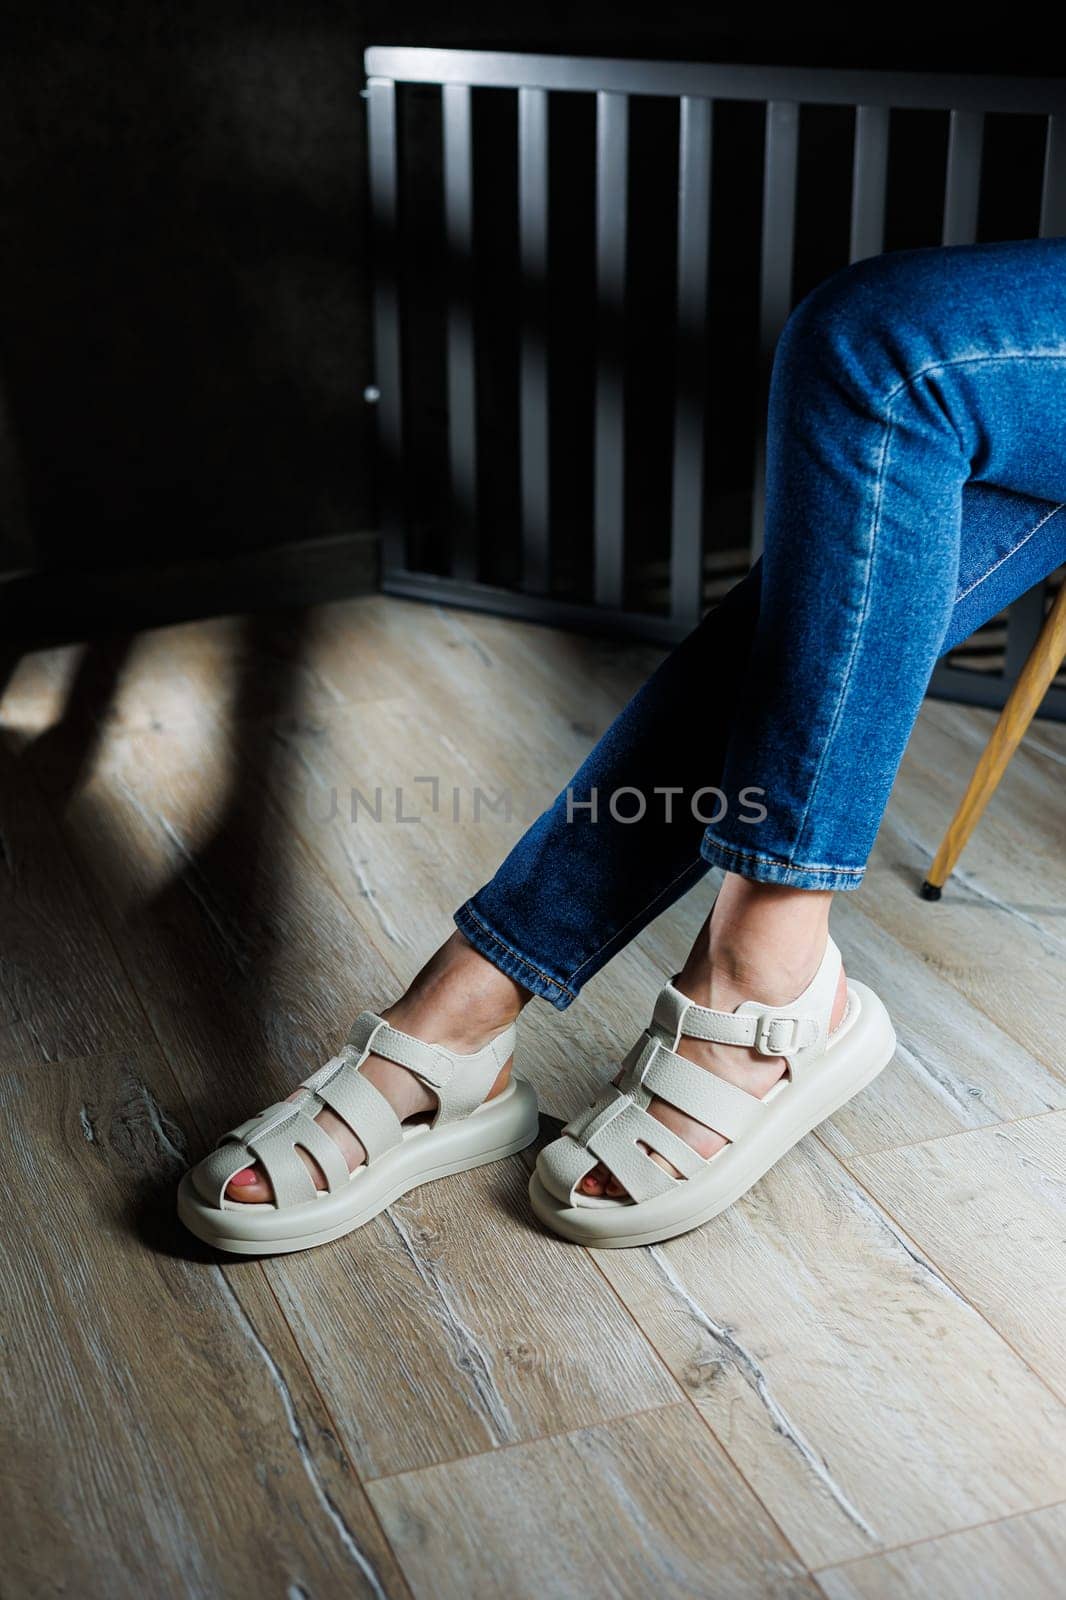 Slender female legs in beige leather sandals without heels. Collection of women's summer sandals.